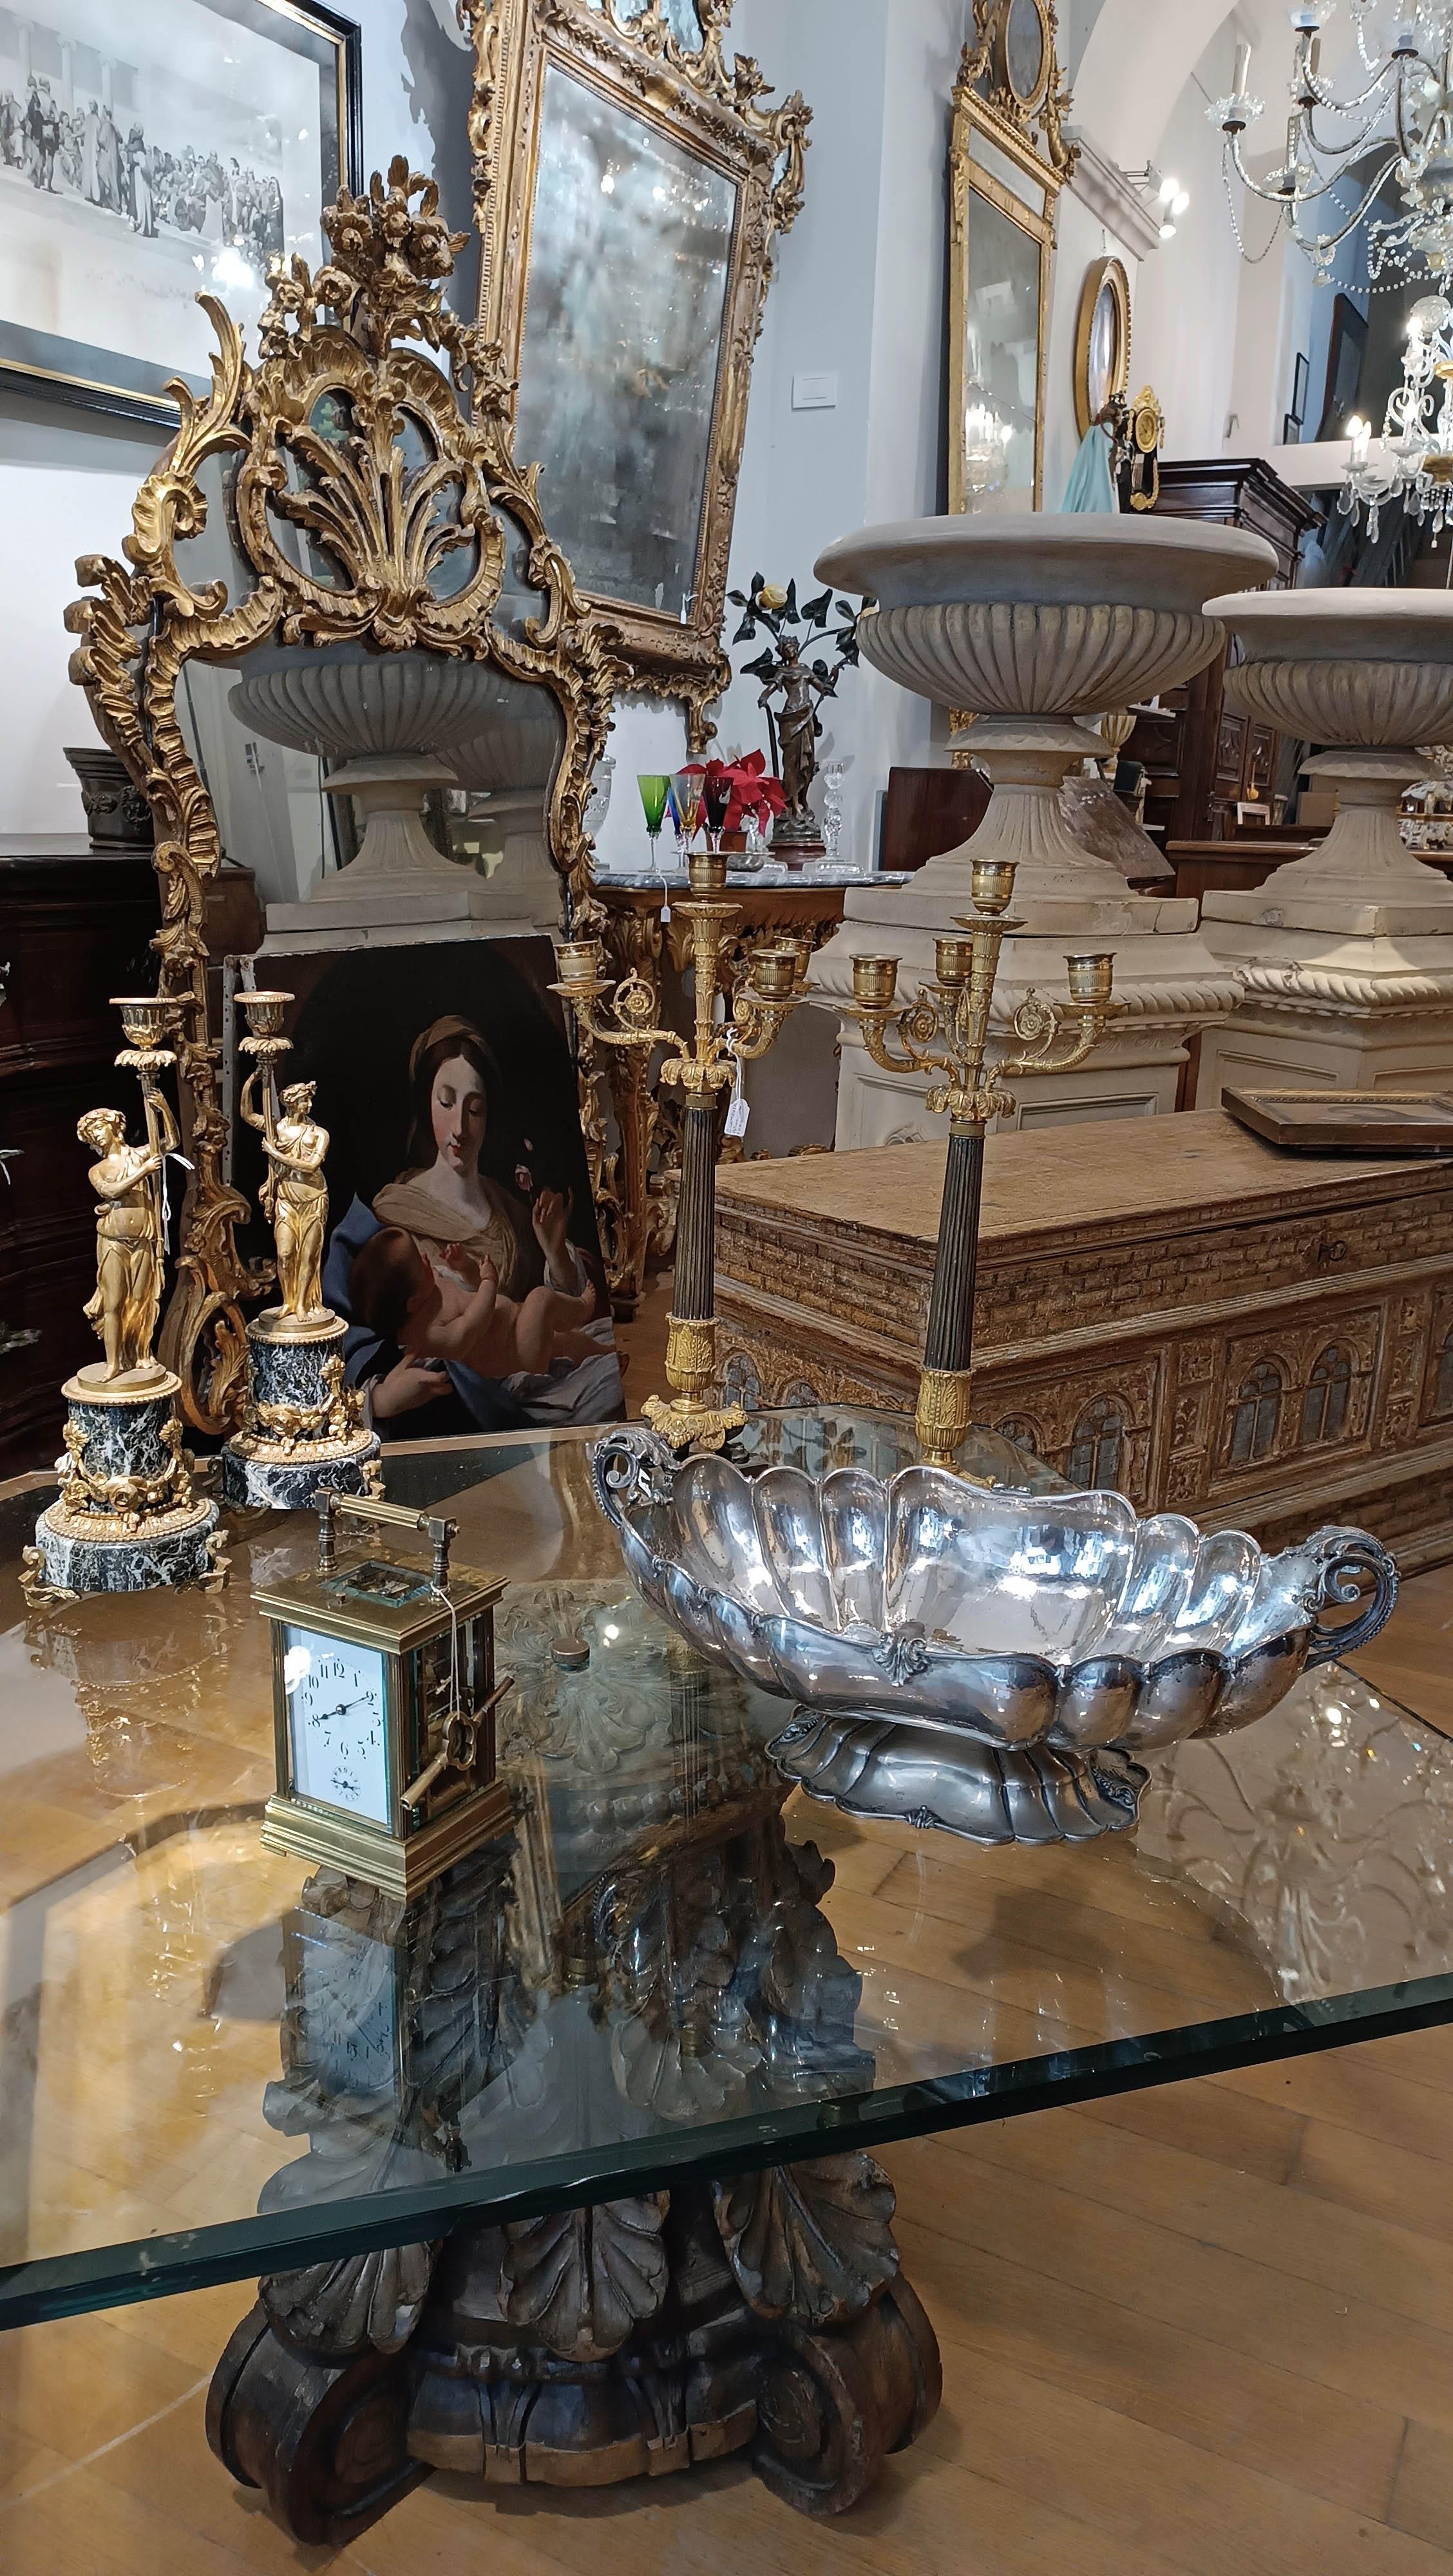 LATE 19th-EARLY 20th CENTURY ITALIAN SILVER CENTERPIECE For Sale 3